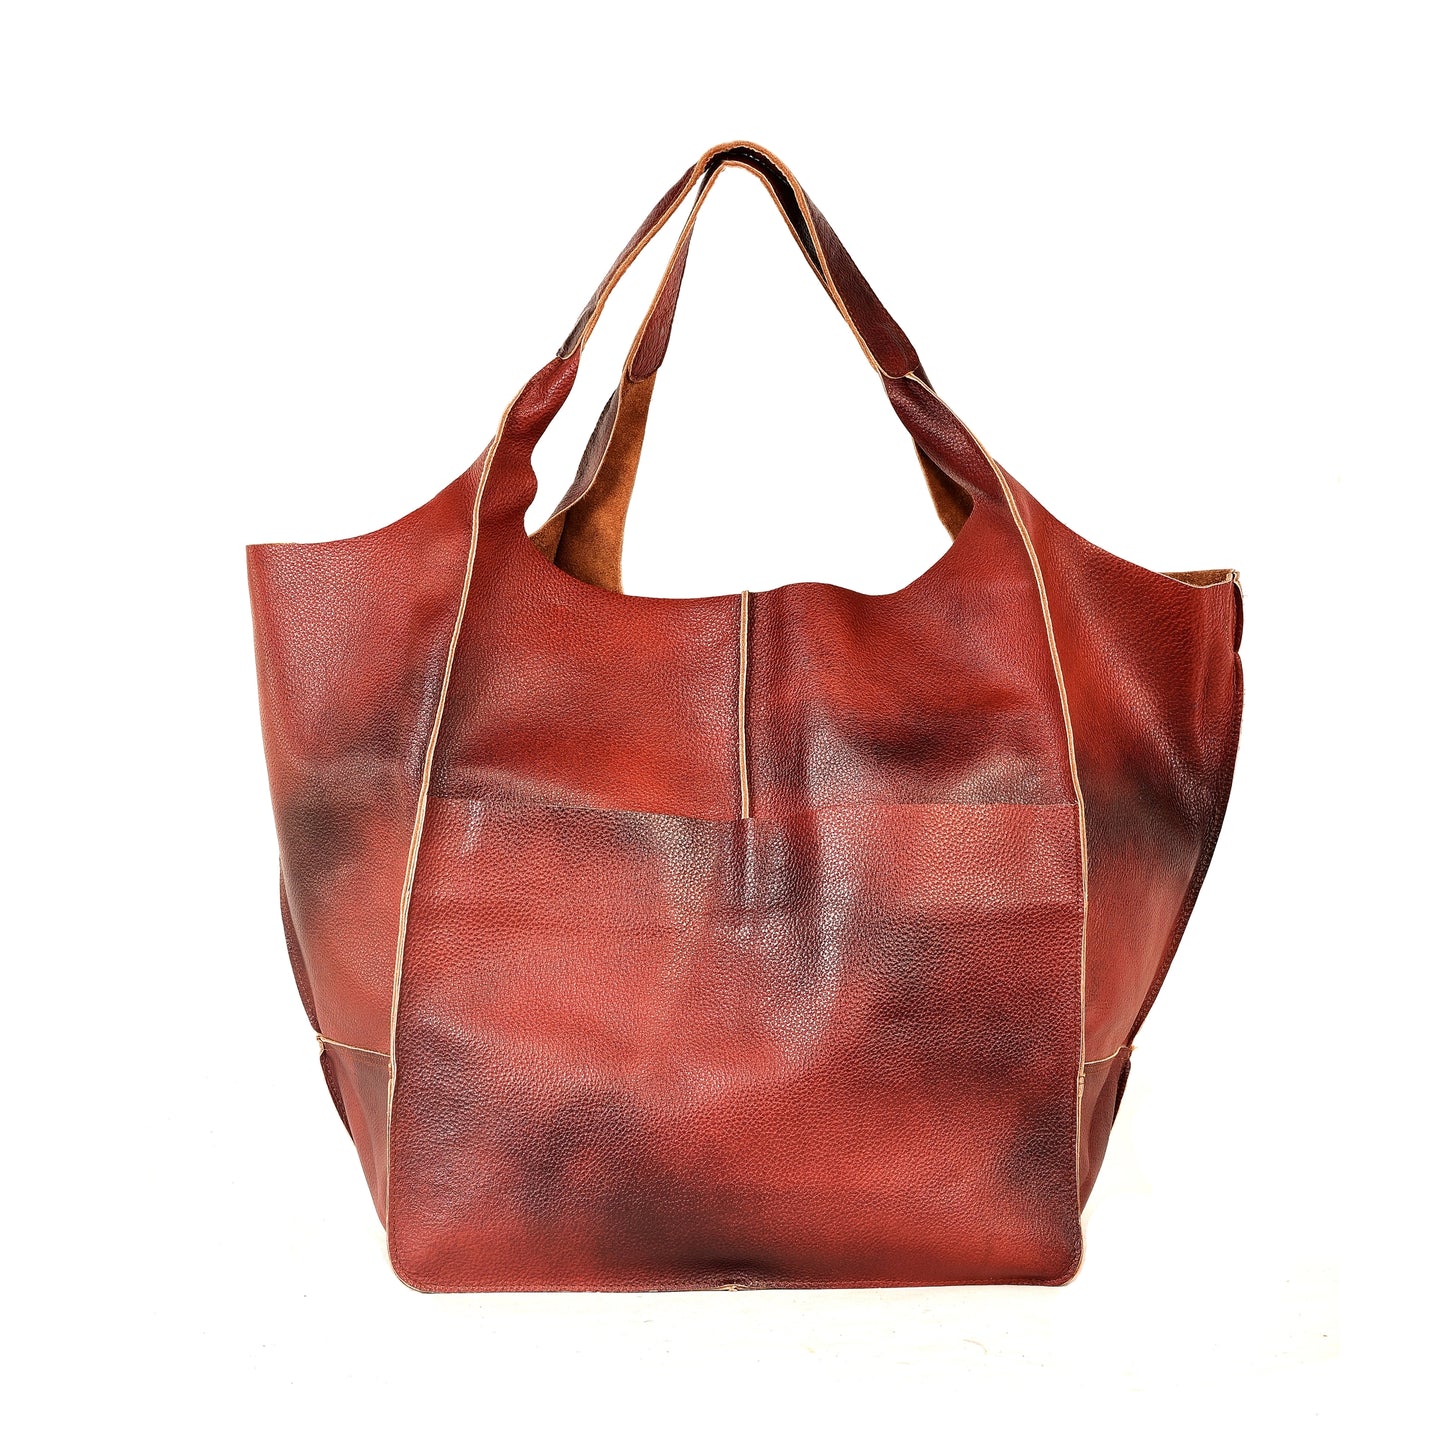 Extra Large Red Leather Tote Shopper Bag Leather Shoulder Bag Large Weekender Travel Bag Leather Shopping Bag Oversized Everyday Tote Purse